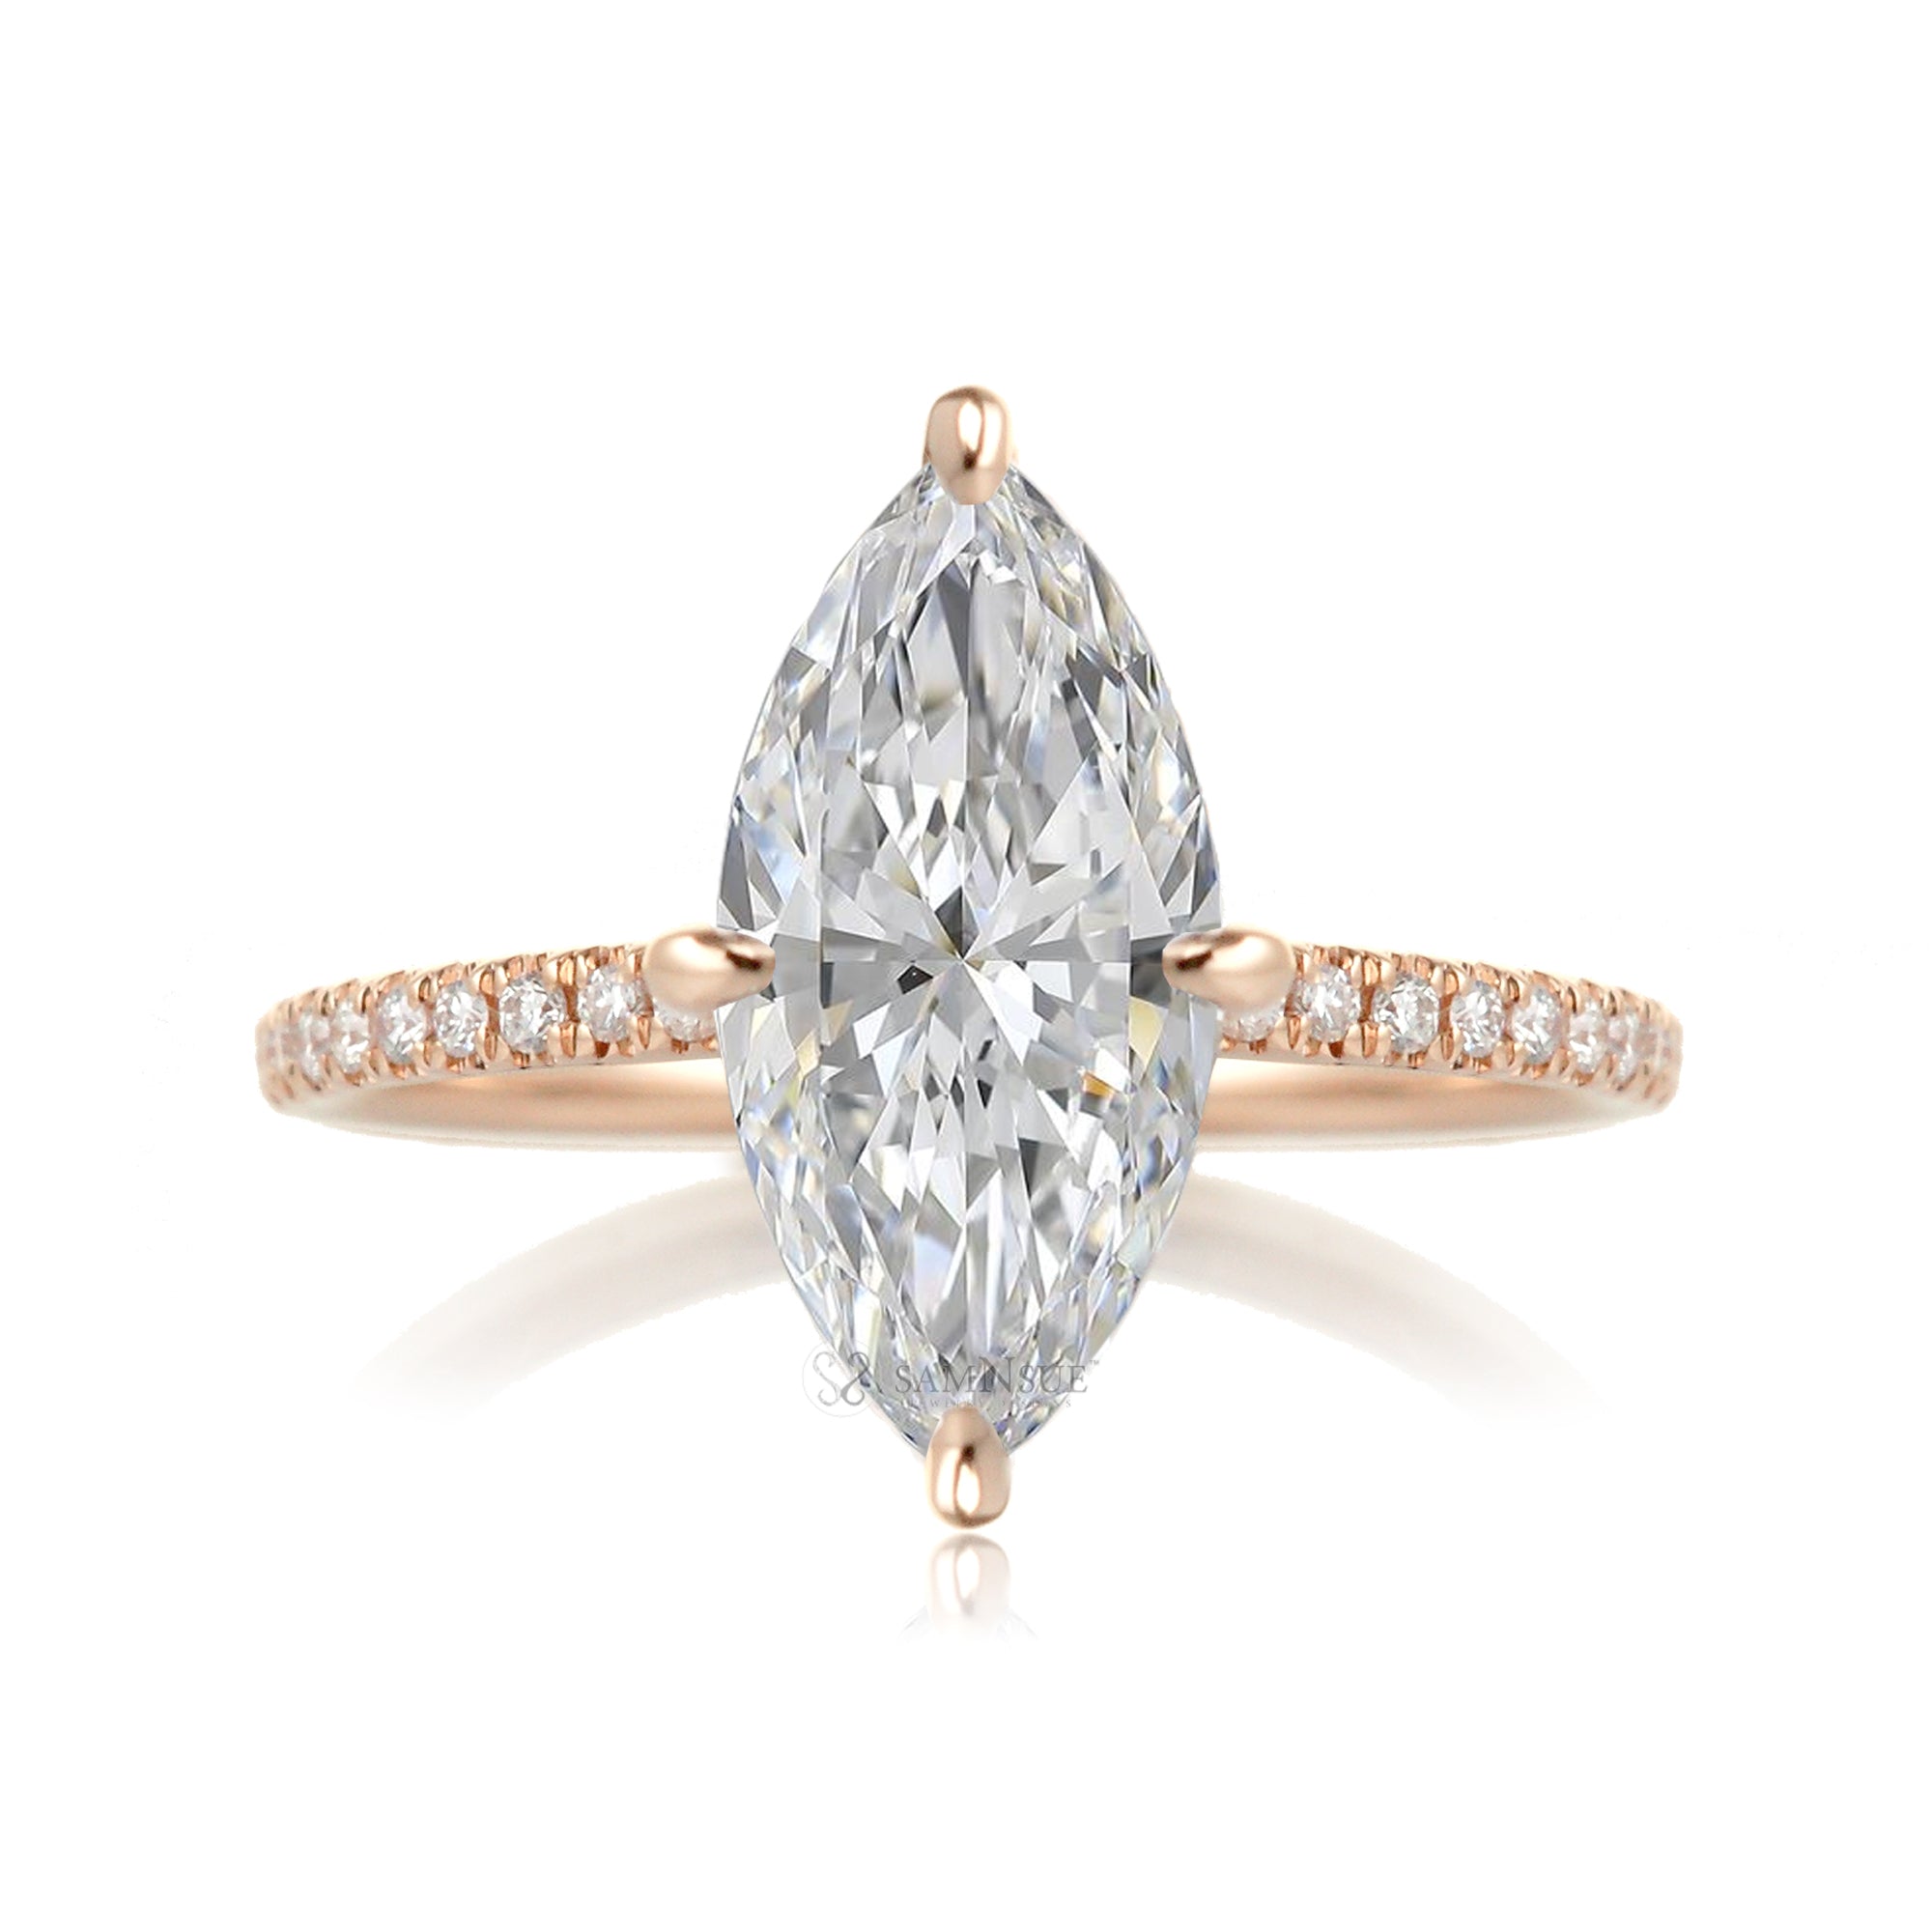 The Ava Marquise Diamond Ring ( Lab-Grown)